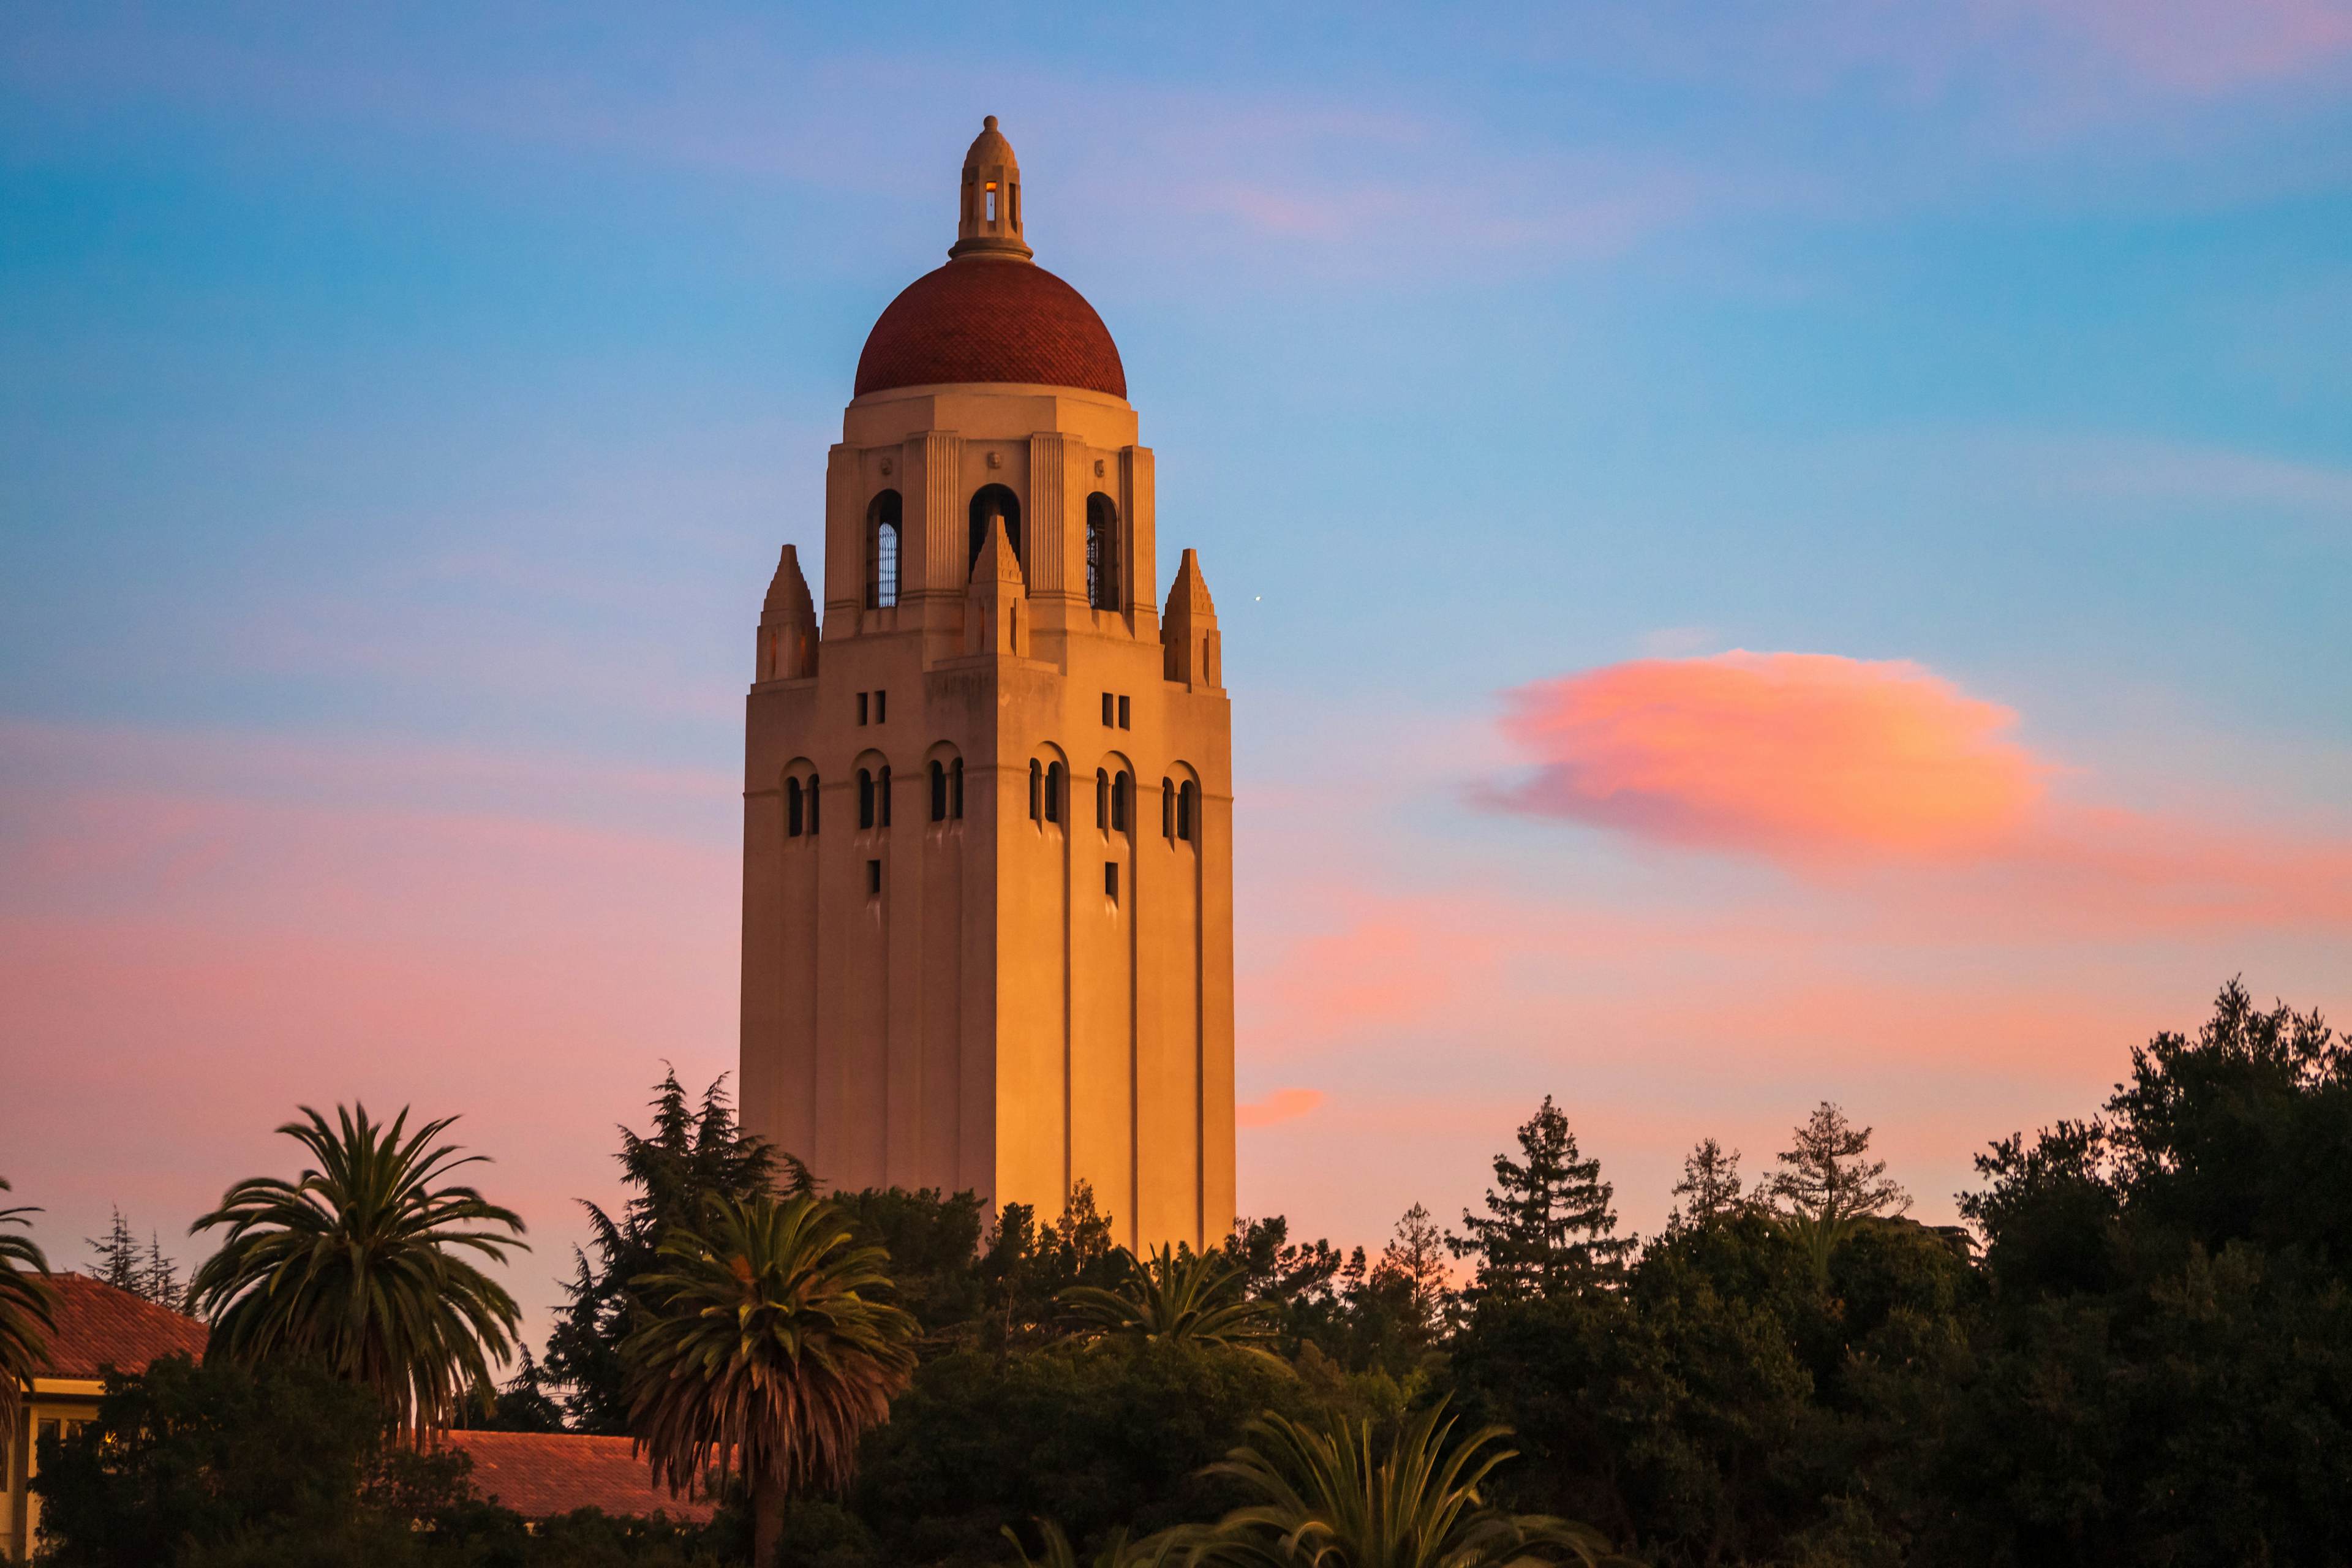 Hoover tower Stanford early dusk